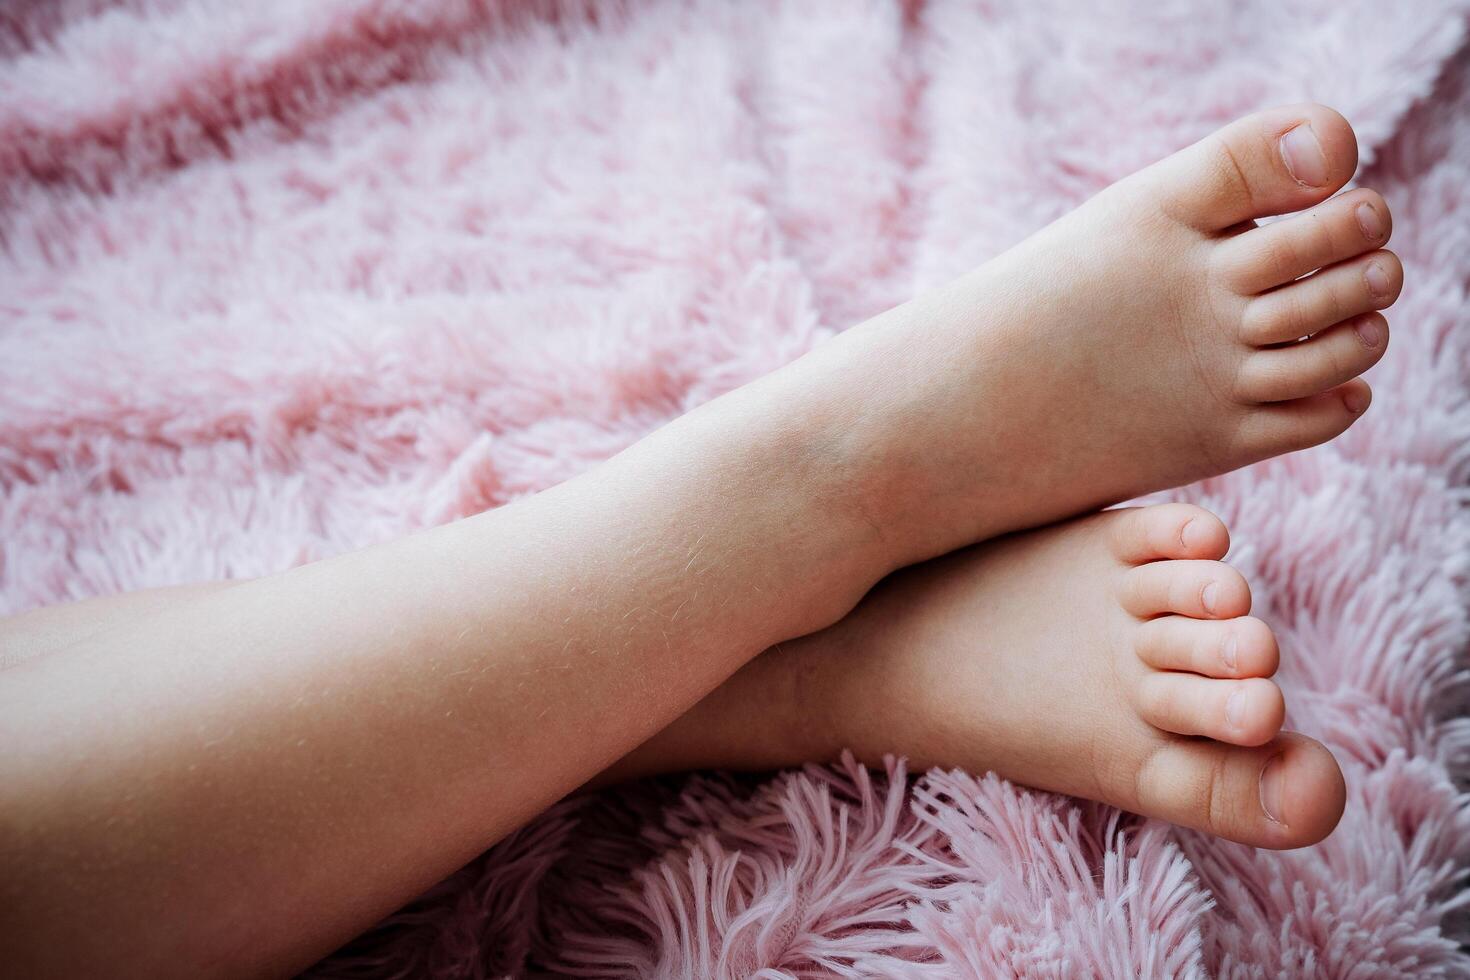 Childrens legs lie against the background of a pink blanket, two legs, feet, crossed legs of a child. photo